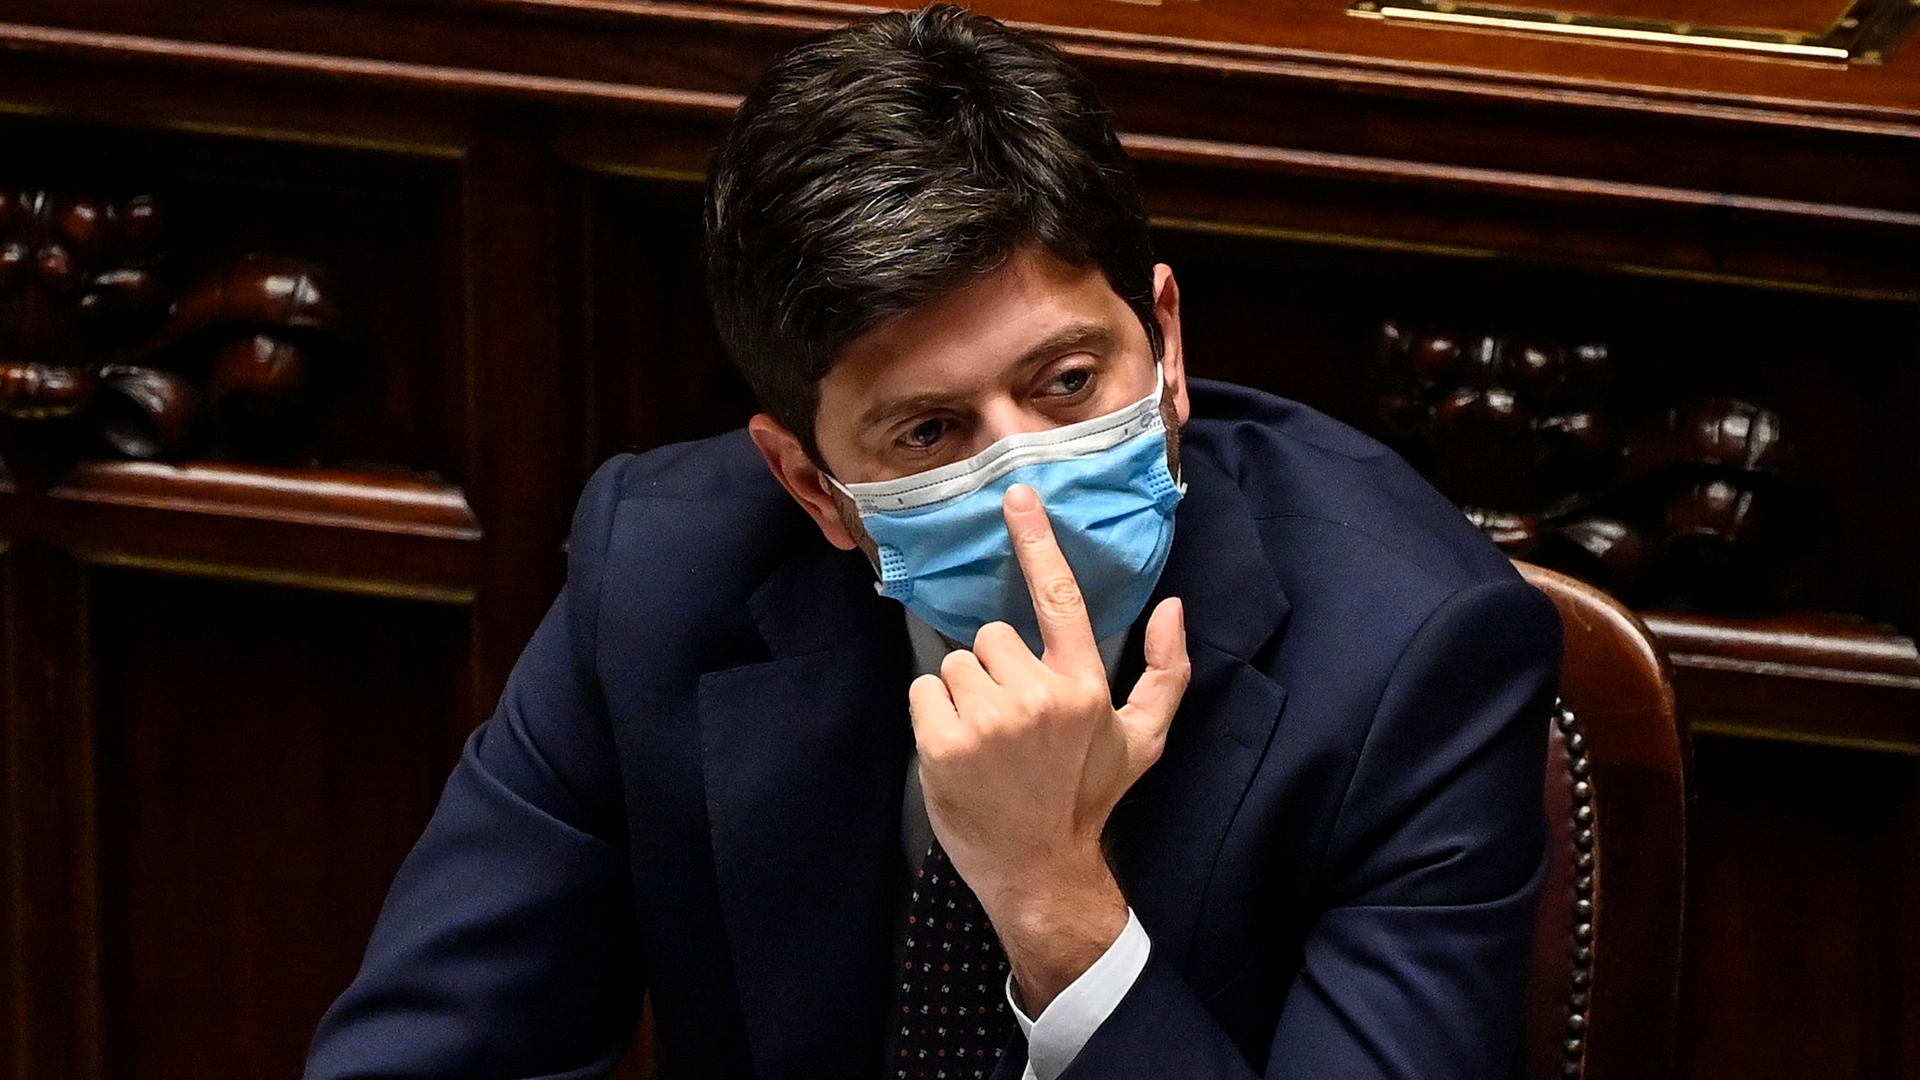 Italian Health Minister refers at the Chamber on measures against Covid